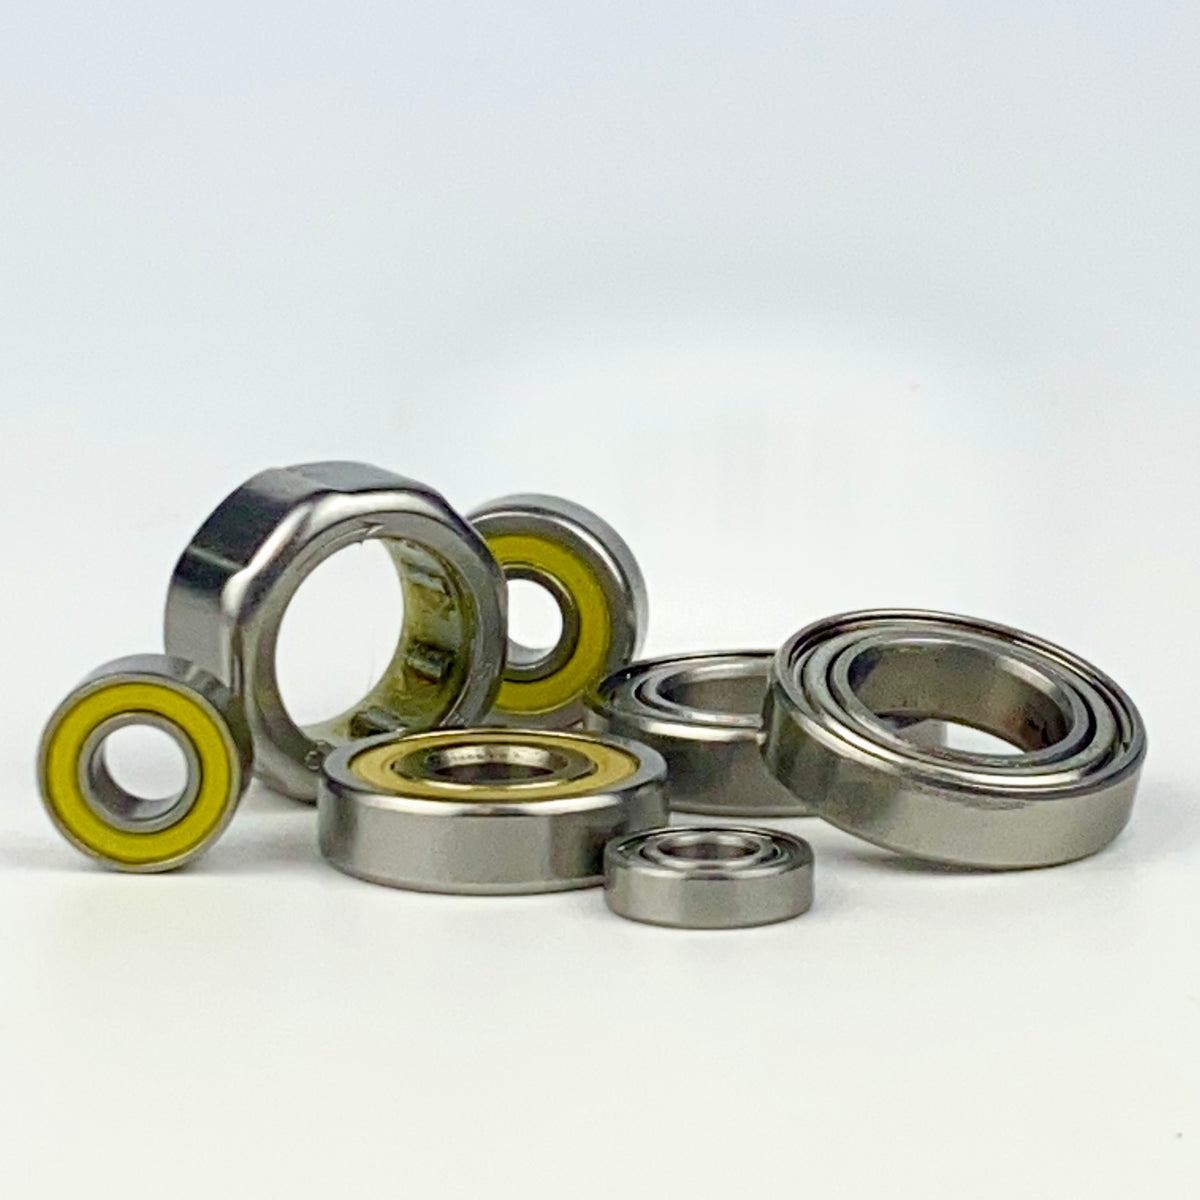 Fishing Reel Bearings: What You Need to Know - USAngler